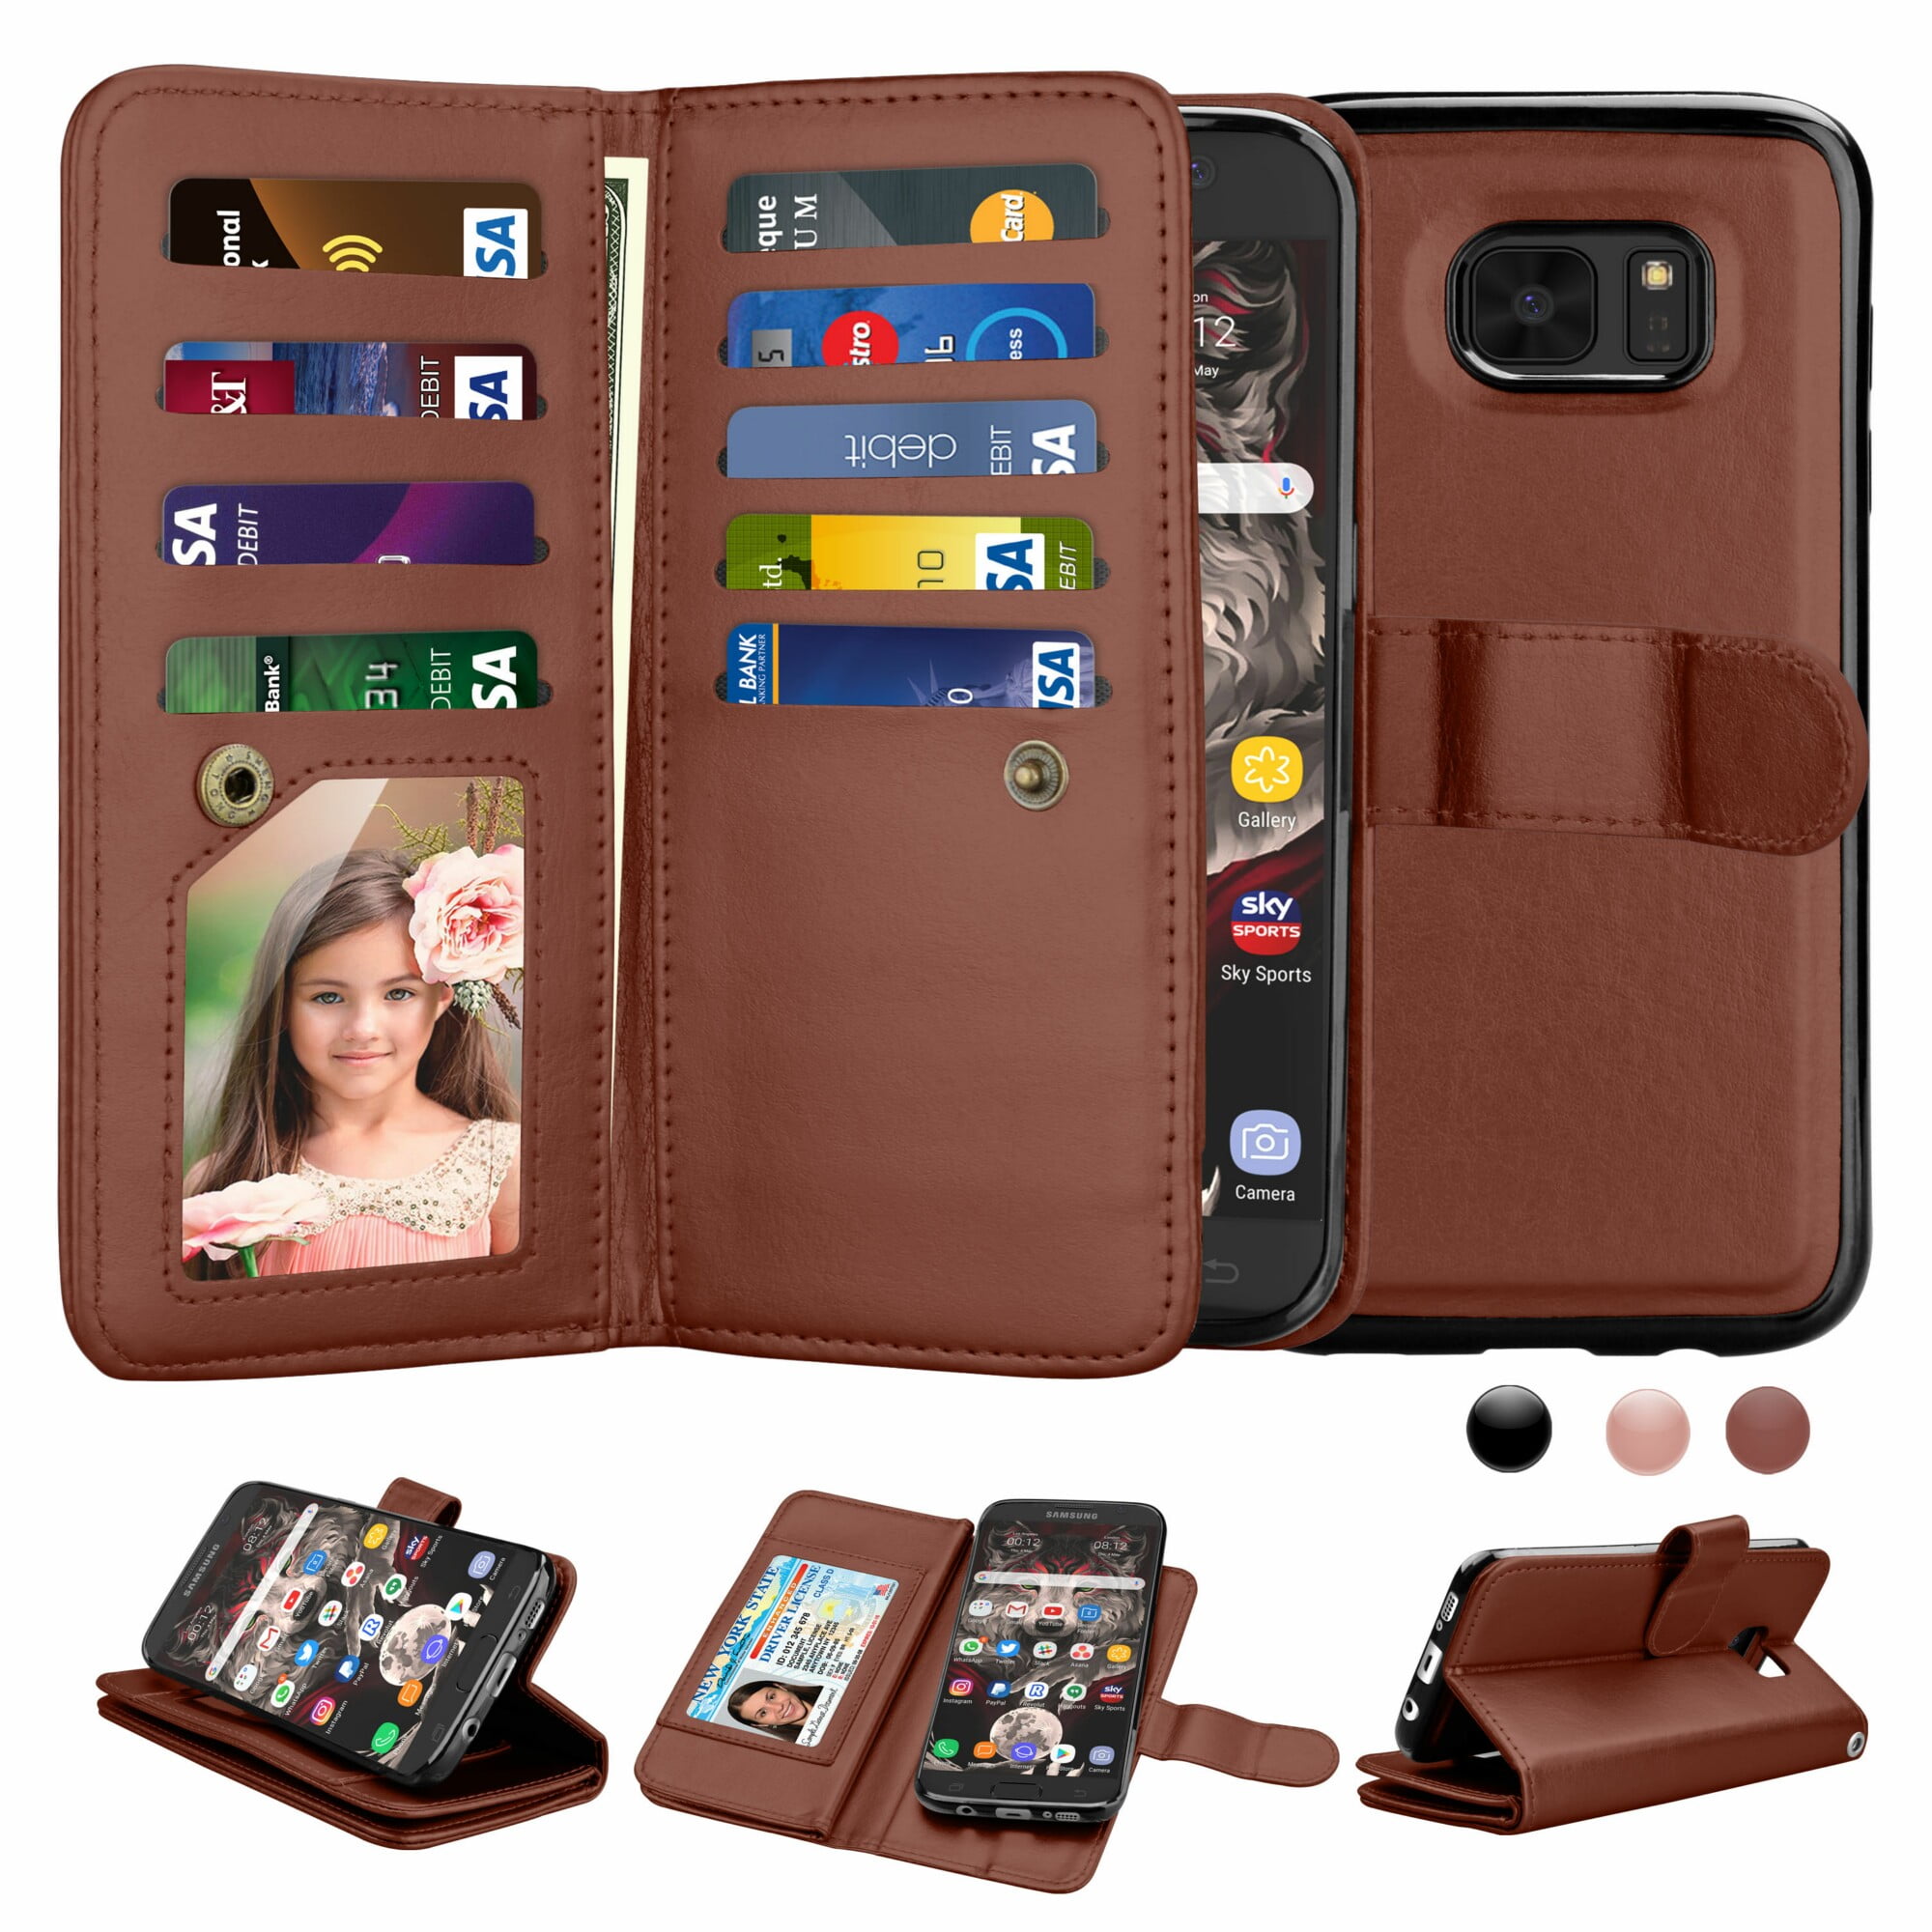 Leather Cover Business Gifts Wallet with Extra Waterproof Underwater Case Flip Case for Samsung Galaxy S7 Edge 